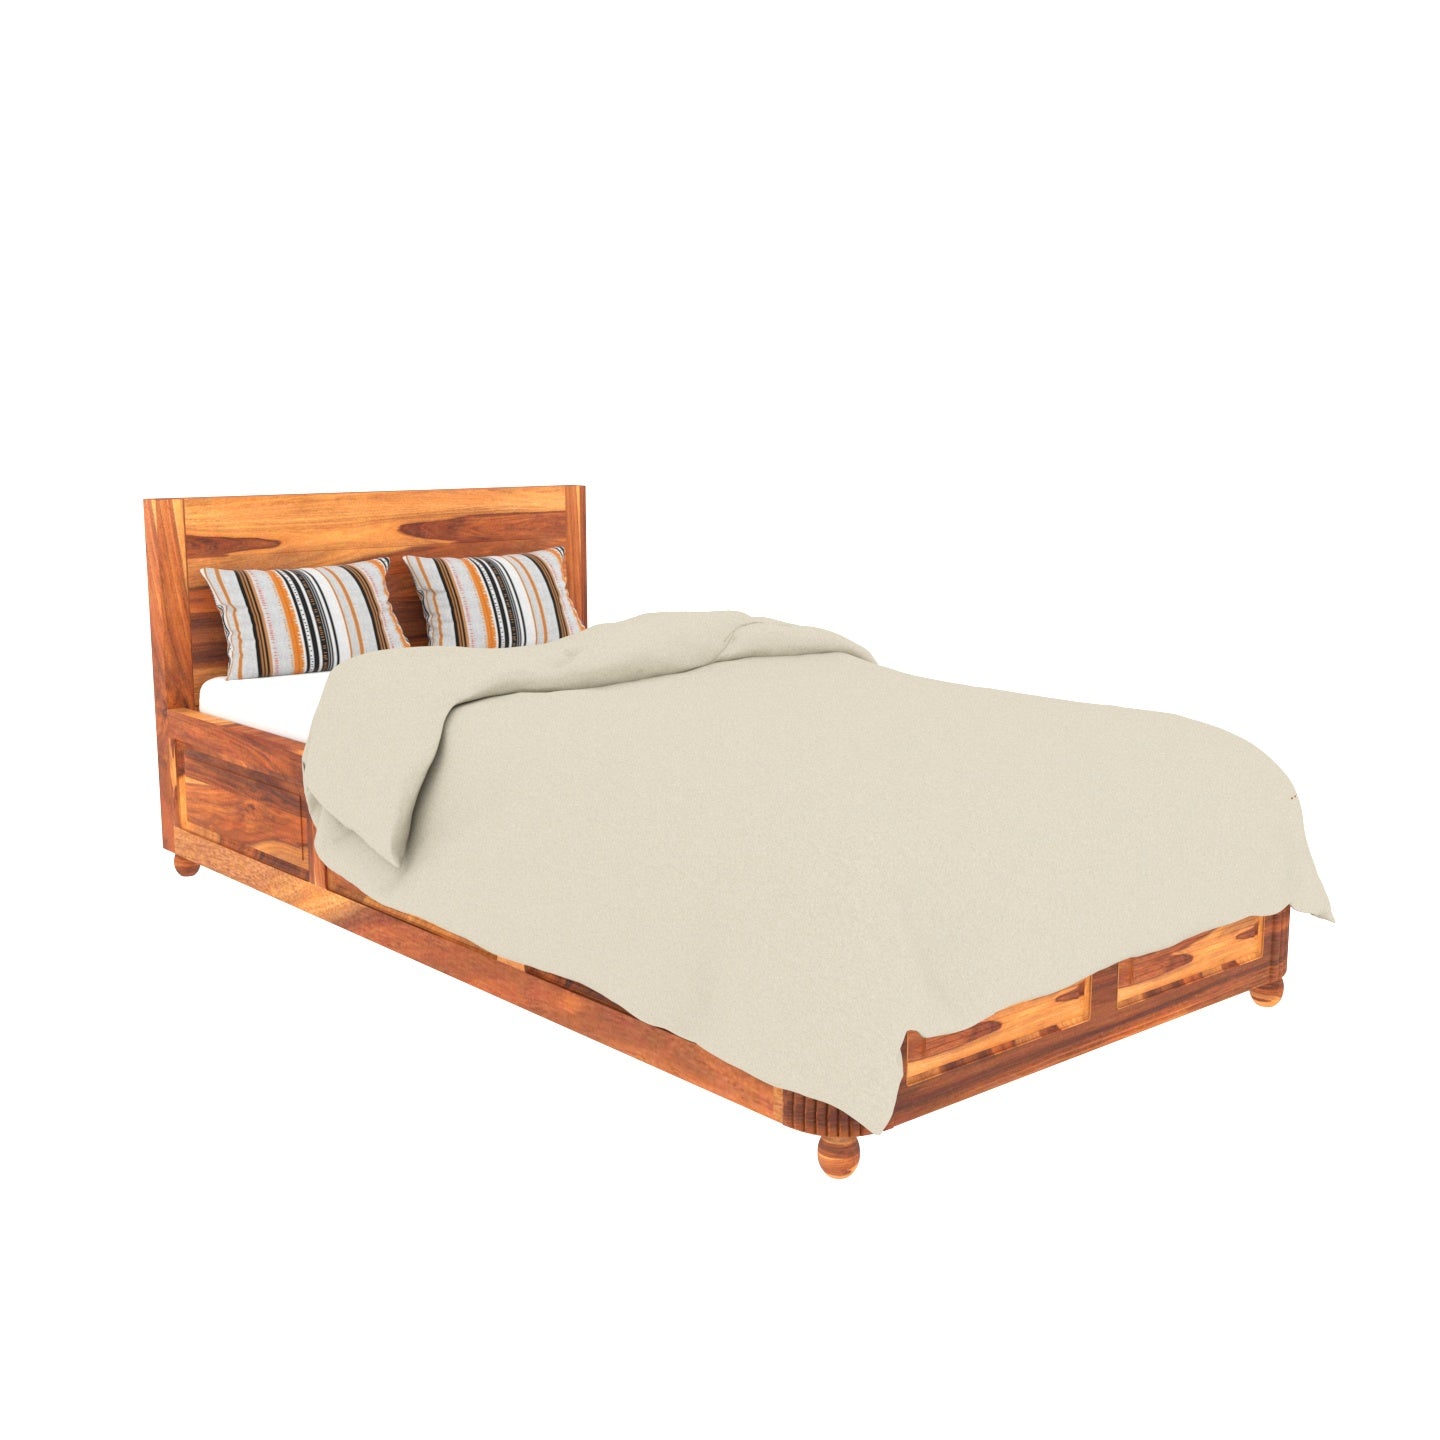 Classic Versatile Handmade Wooden Bed with Rustic Finish Table and Bedside Bedroom Furniture Sets